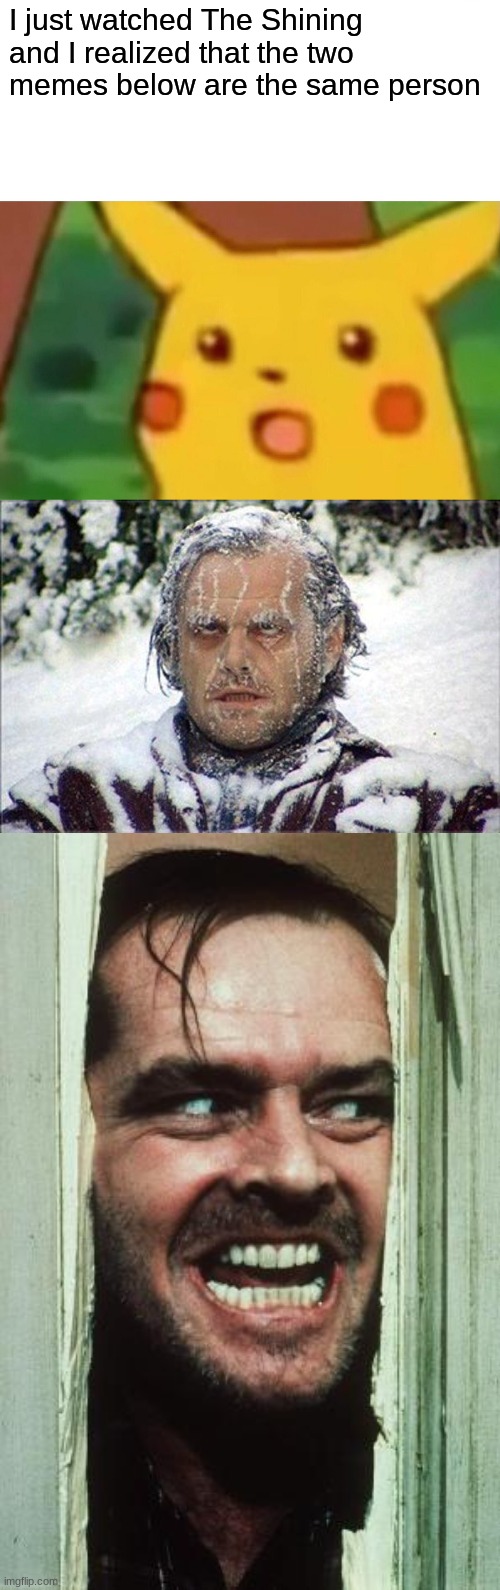 mind blown. also im scarred for life | I just watched The Shining and I realized that the two memes below are the same person | image tagged in memes,surprised pikachu,frozen jack,here's johnny | made w/ Imgflip meme maker